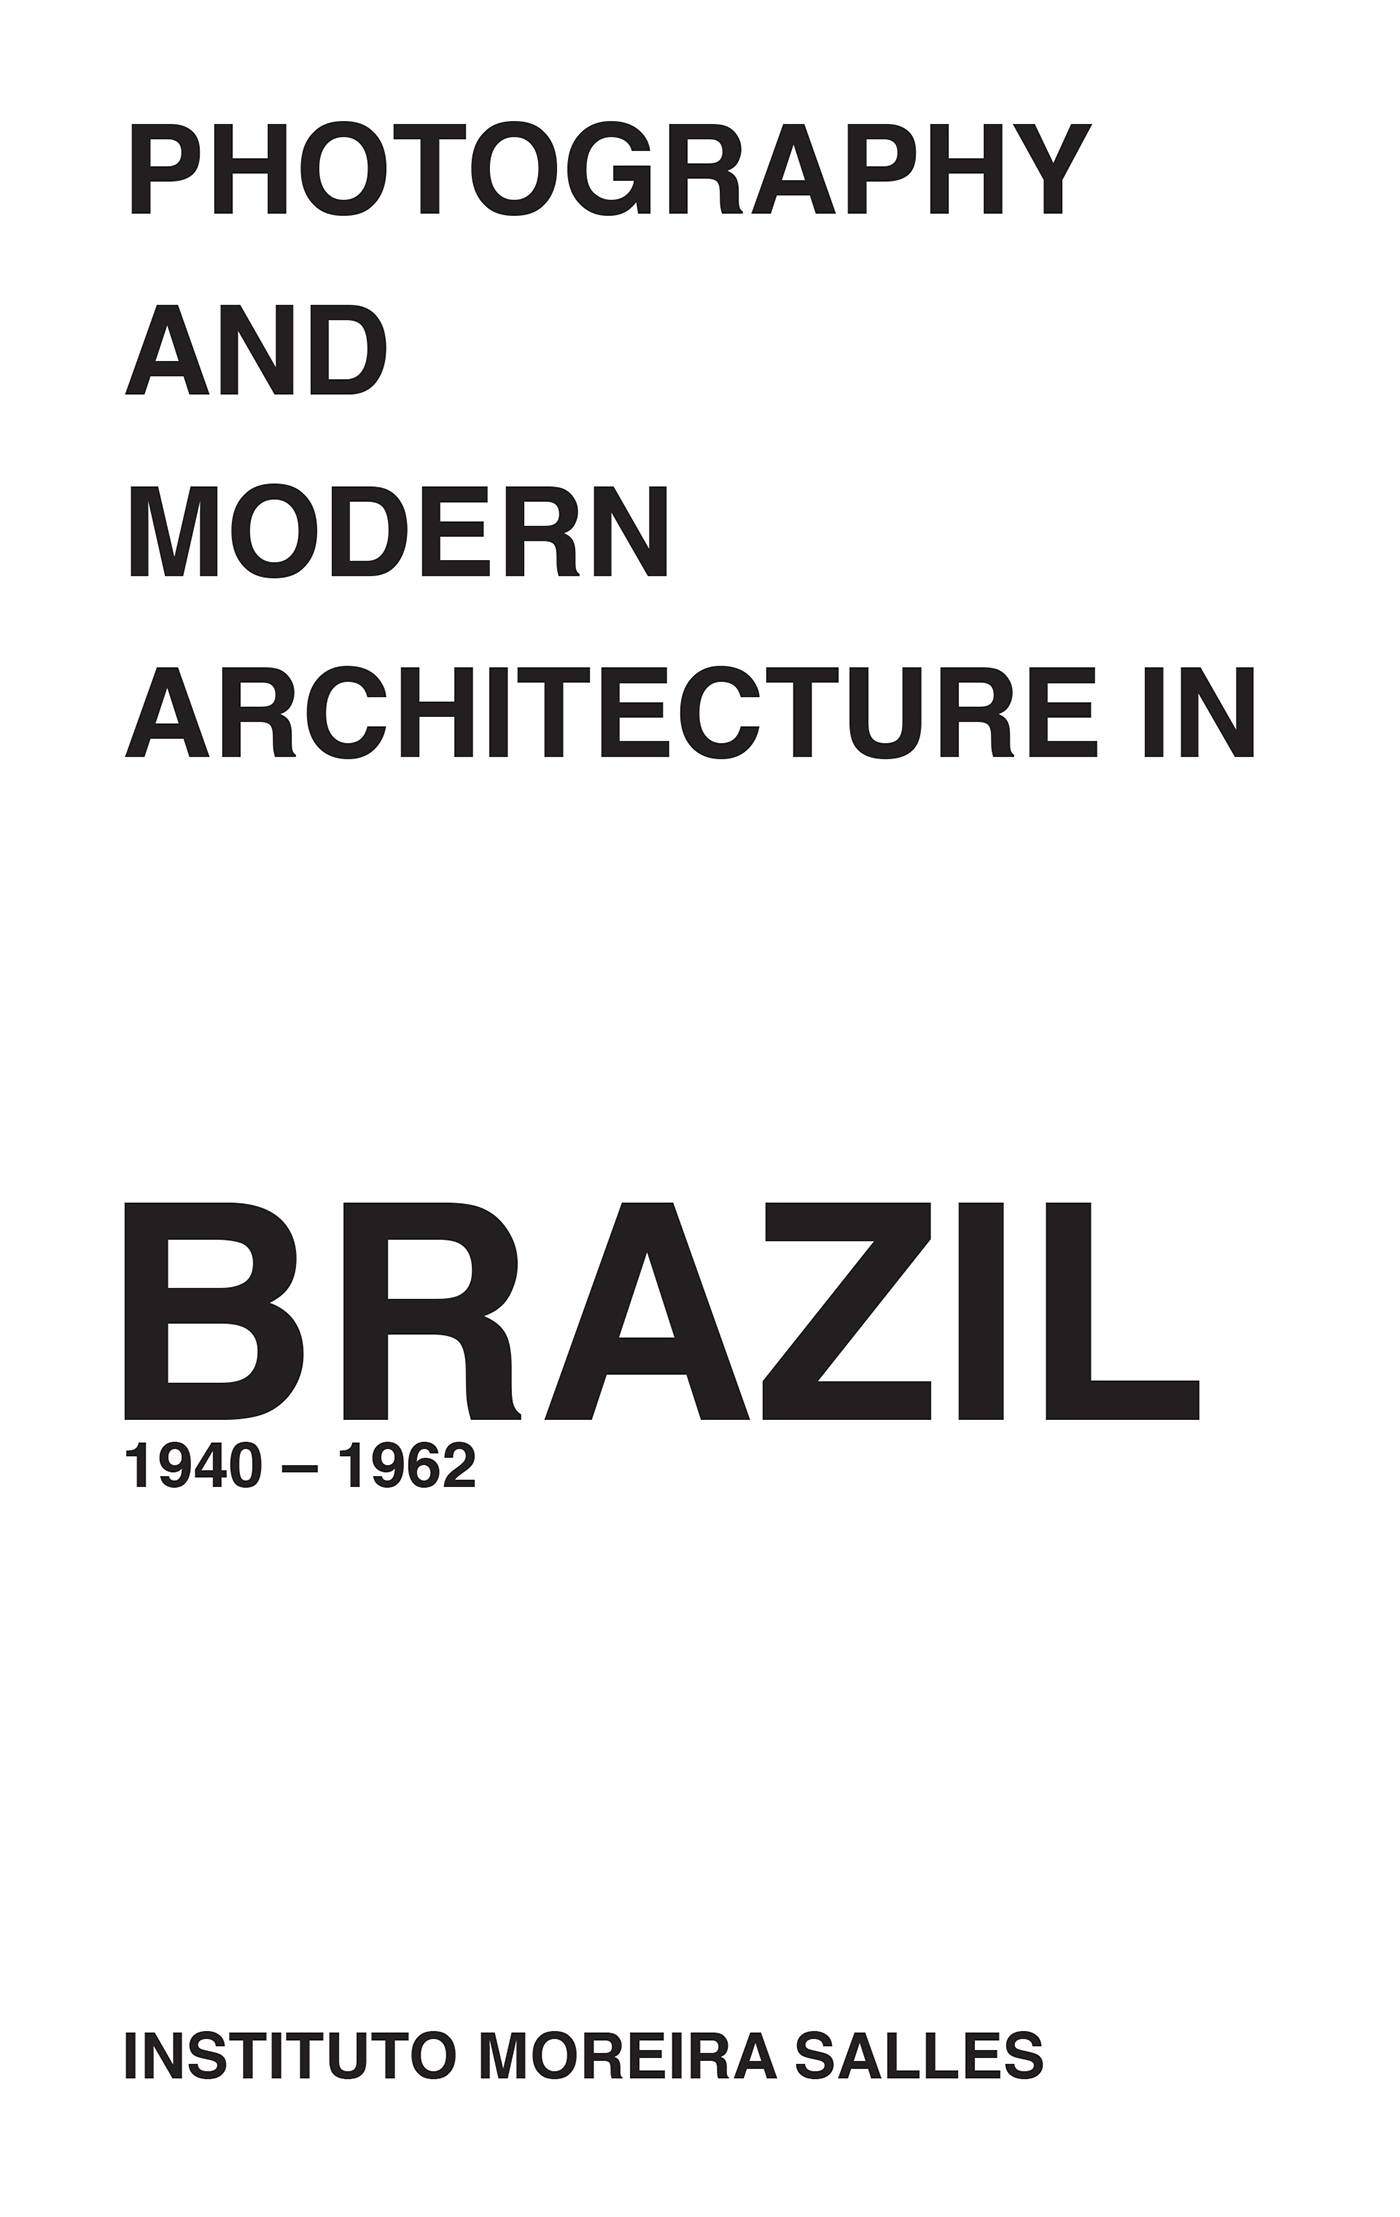 Photography and modern architecture in Brazil Photography  Modern Architecture Brazil swiss style book design grid layout Moreira Salles Marcel Gautherot Oscar Niemeyer